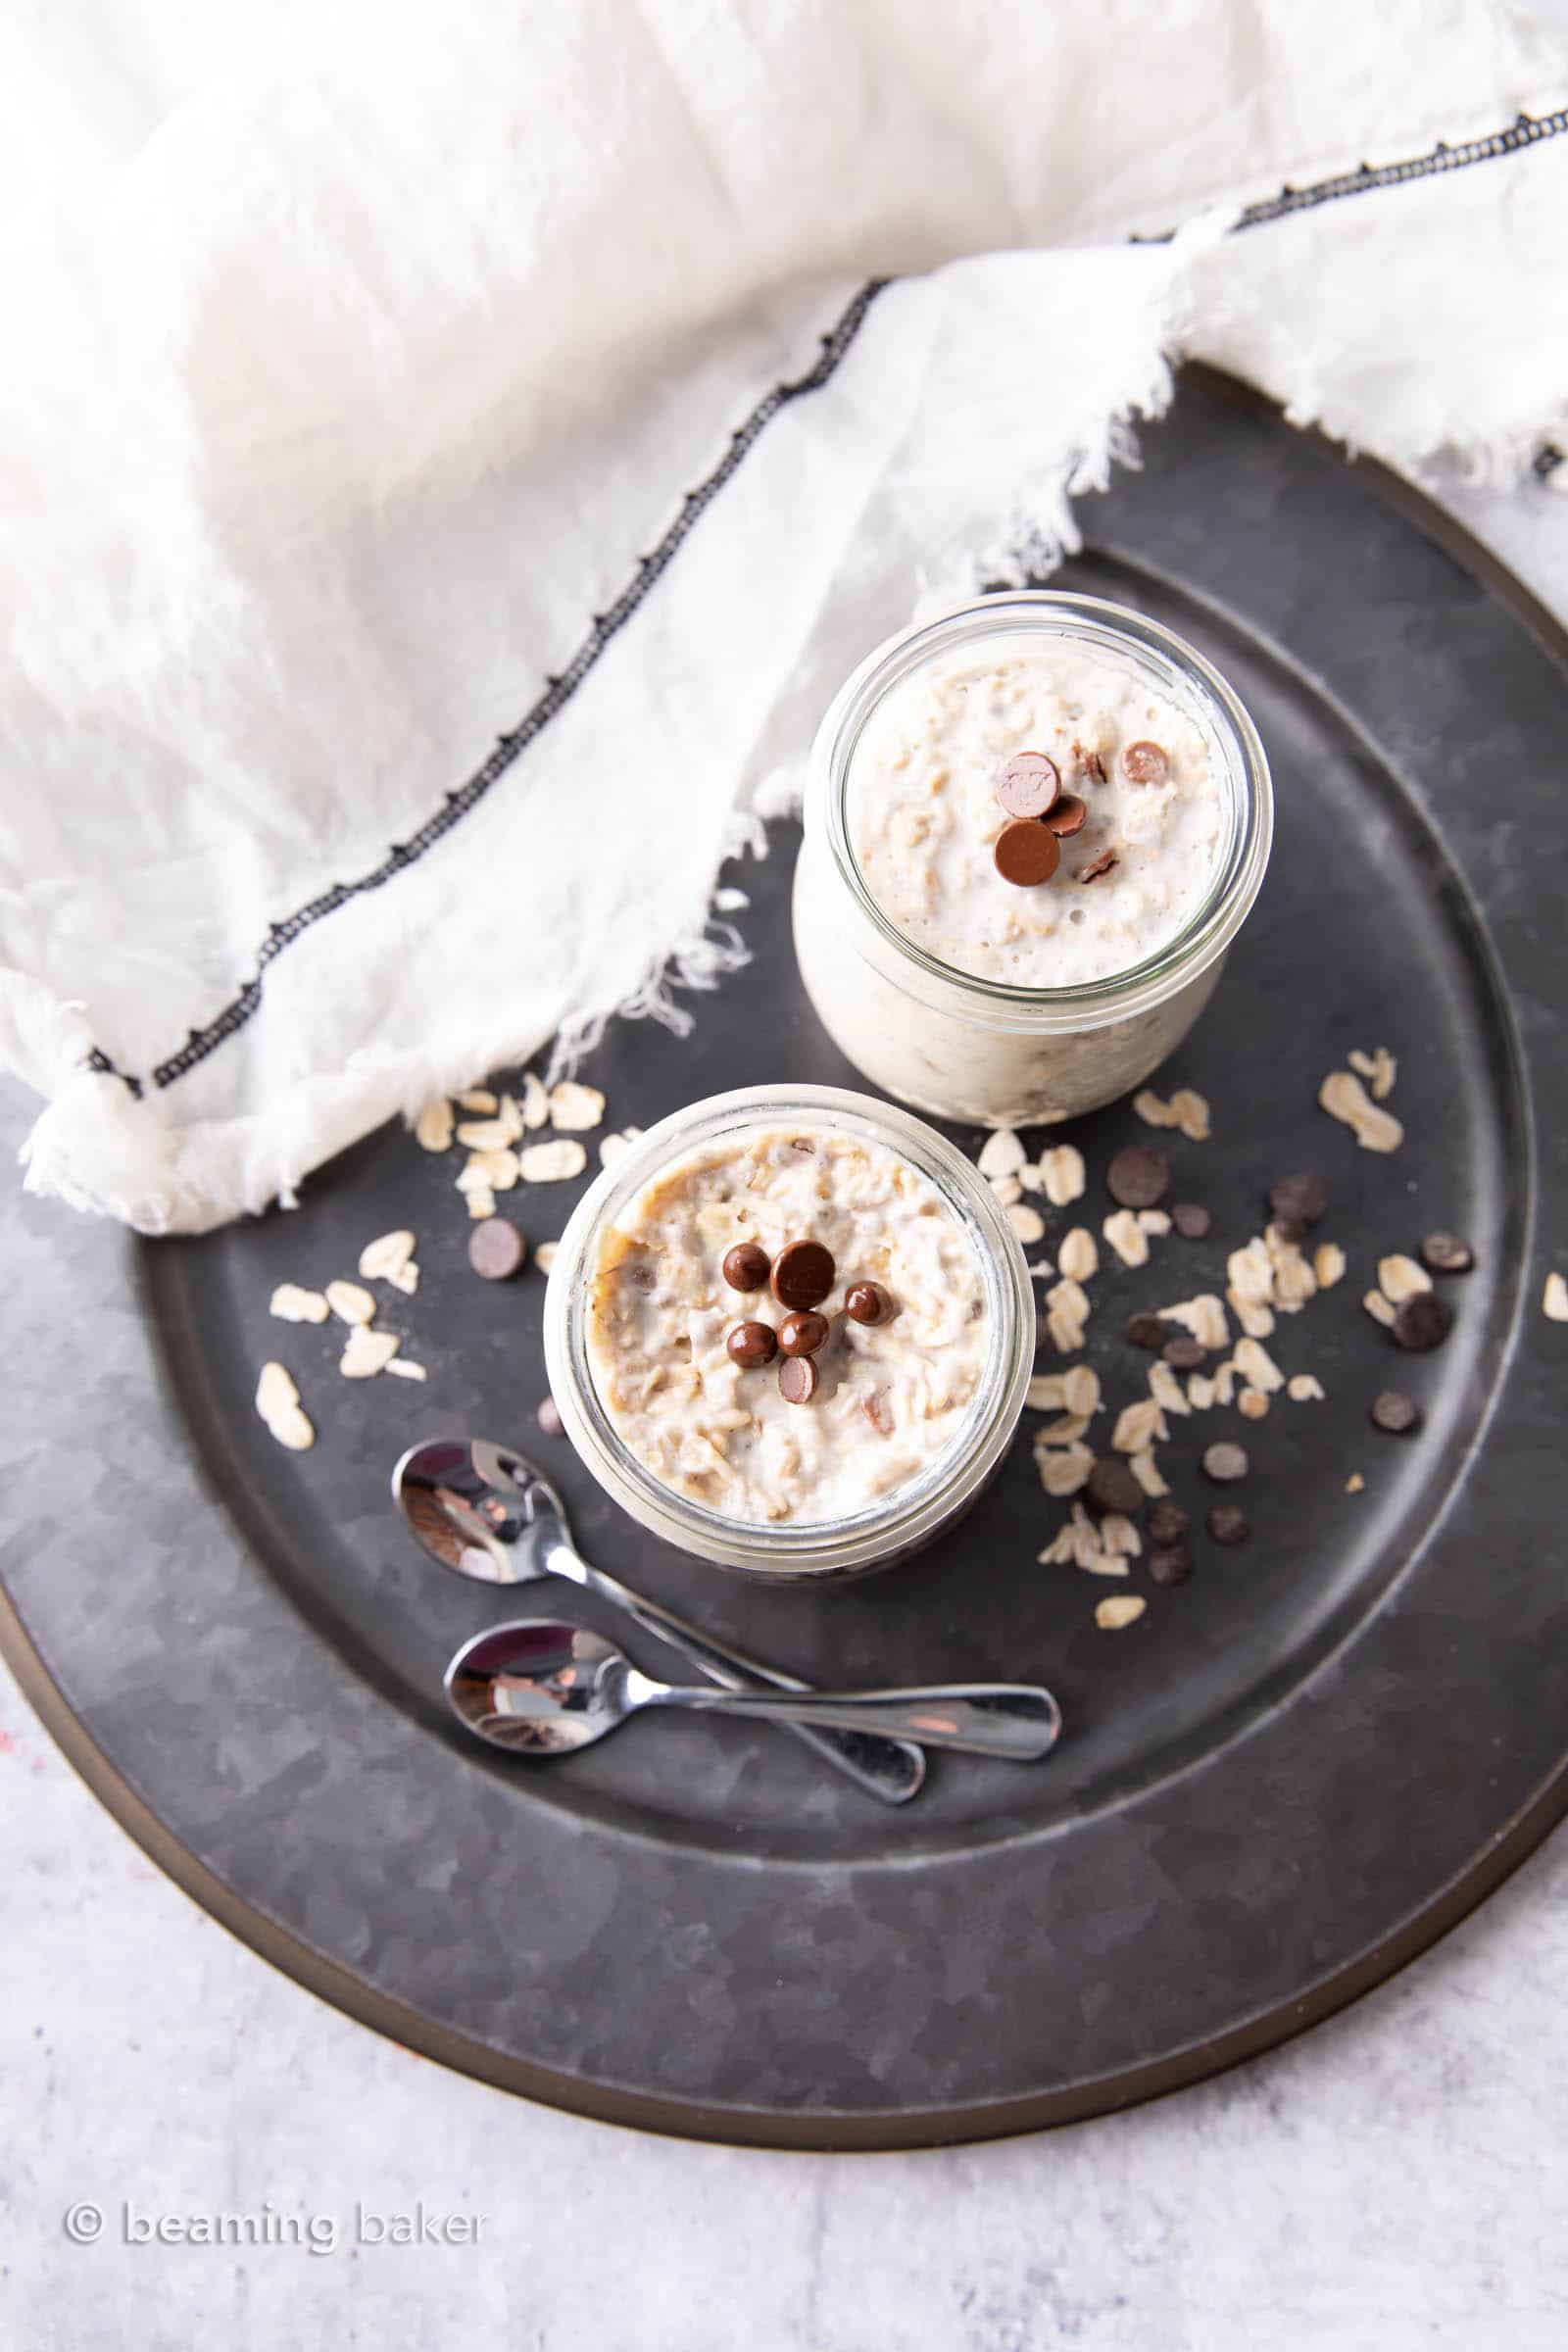 Chocolate Chip Overnight Oats: an easy vegan overnight oats recipe that’s creamy, rich and chockfull of vegan chocolate chips! A quick breakfast made the night before. #Vegan #OvernightOats #OvernightOatmeal #ChocolateChips | Recipe at BeamingBaker.com